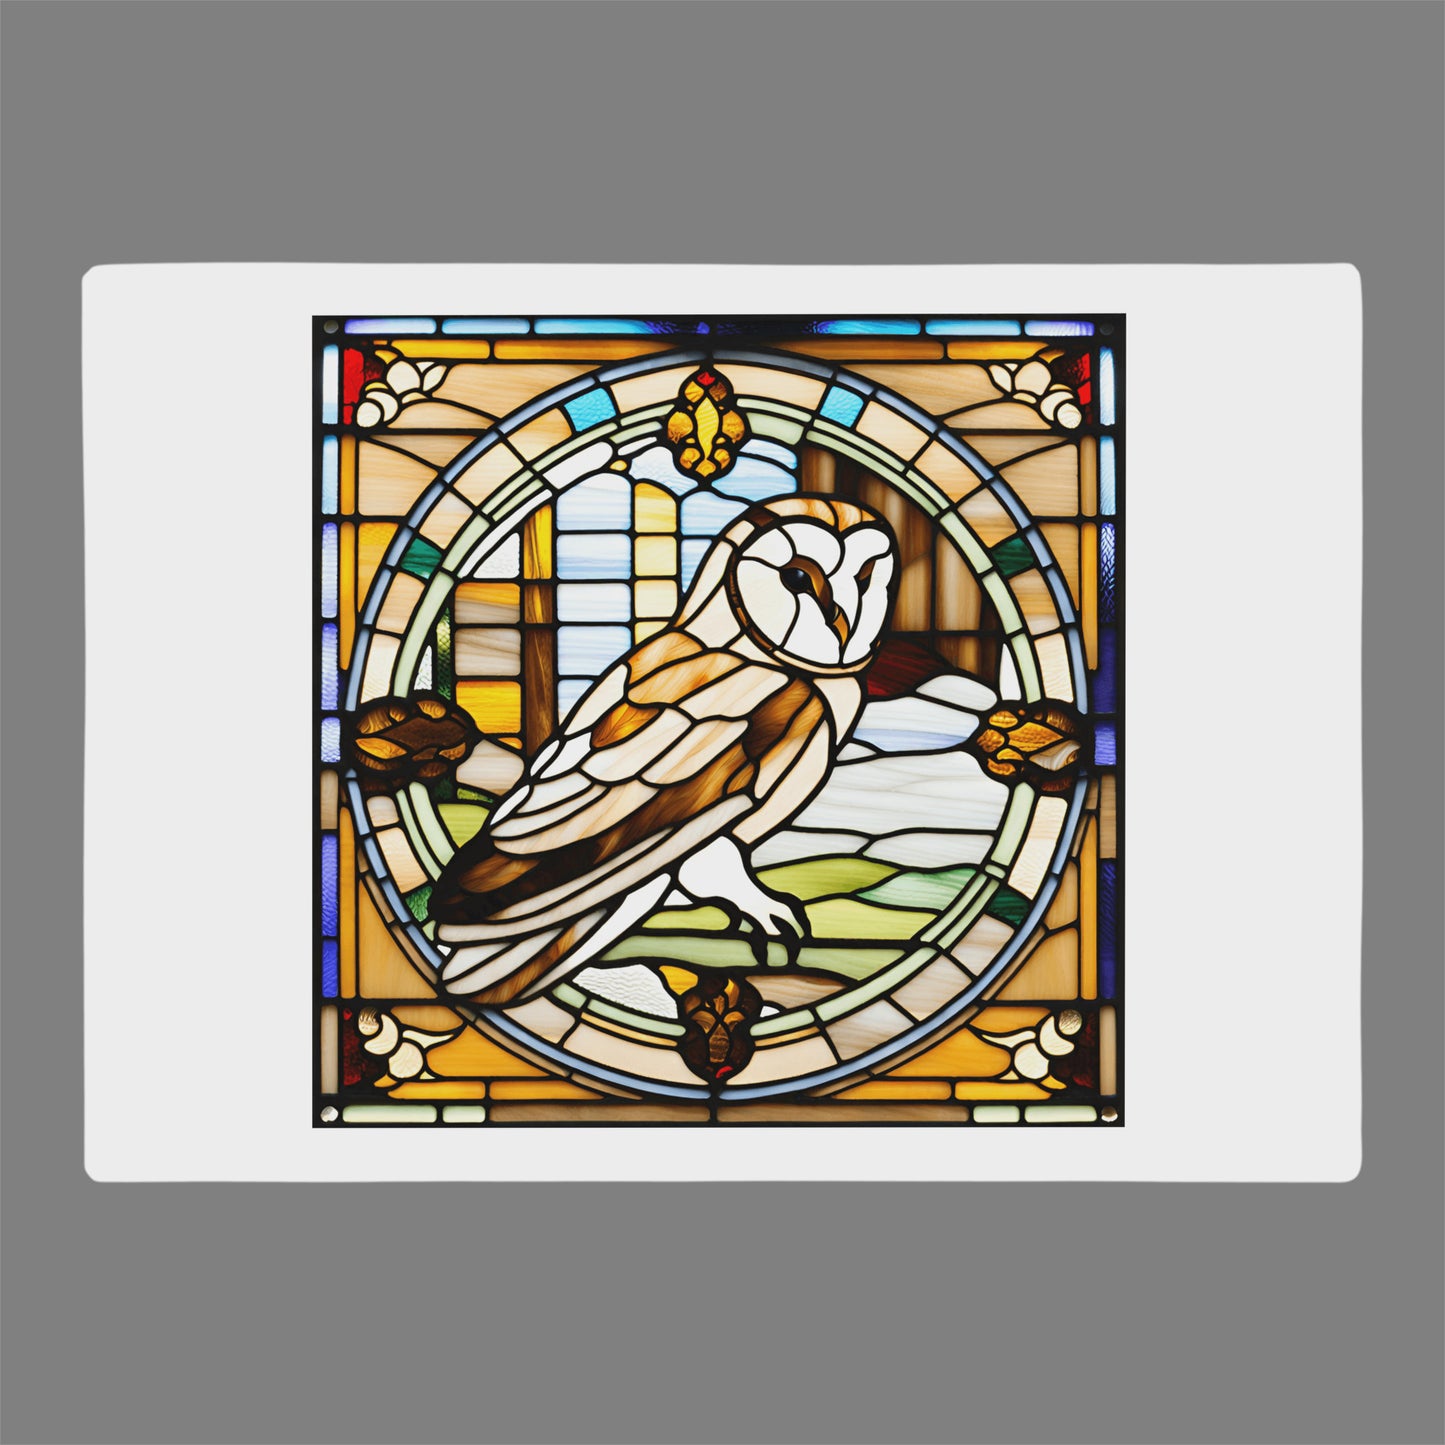 Barn owl stain glass design printed on a glass cutting board unique gift idea